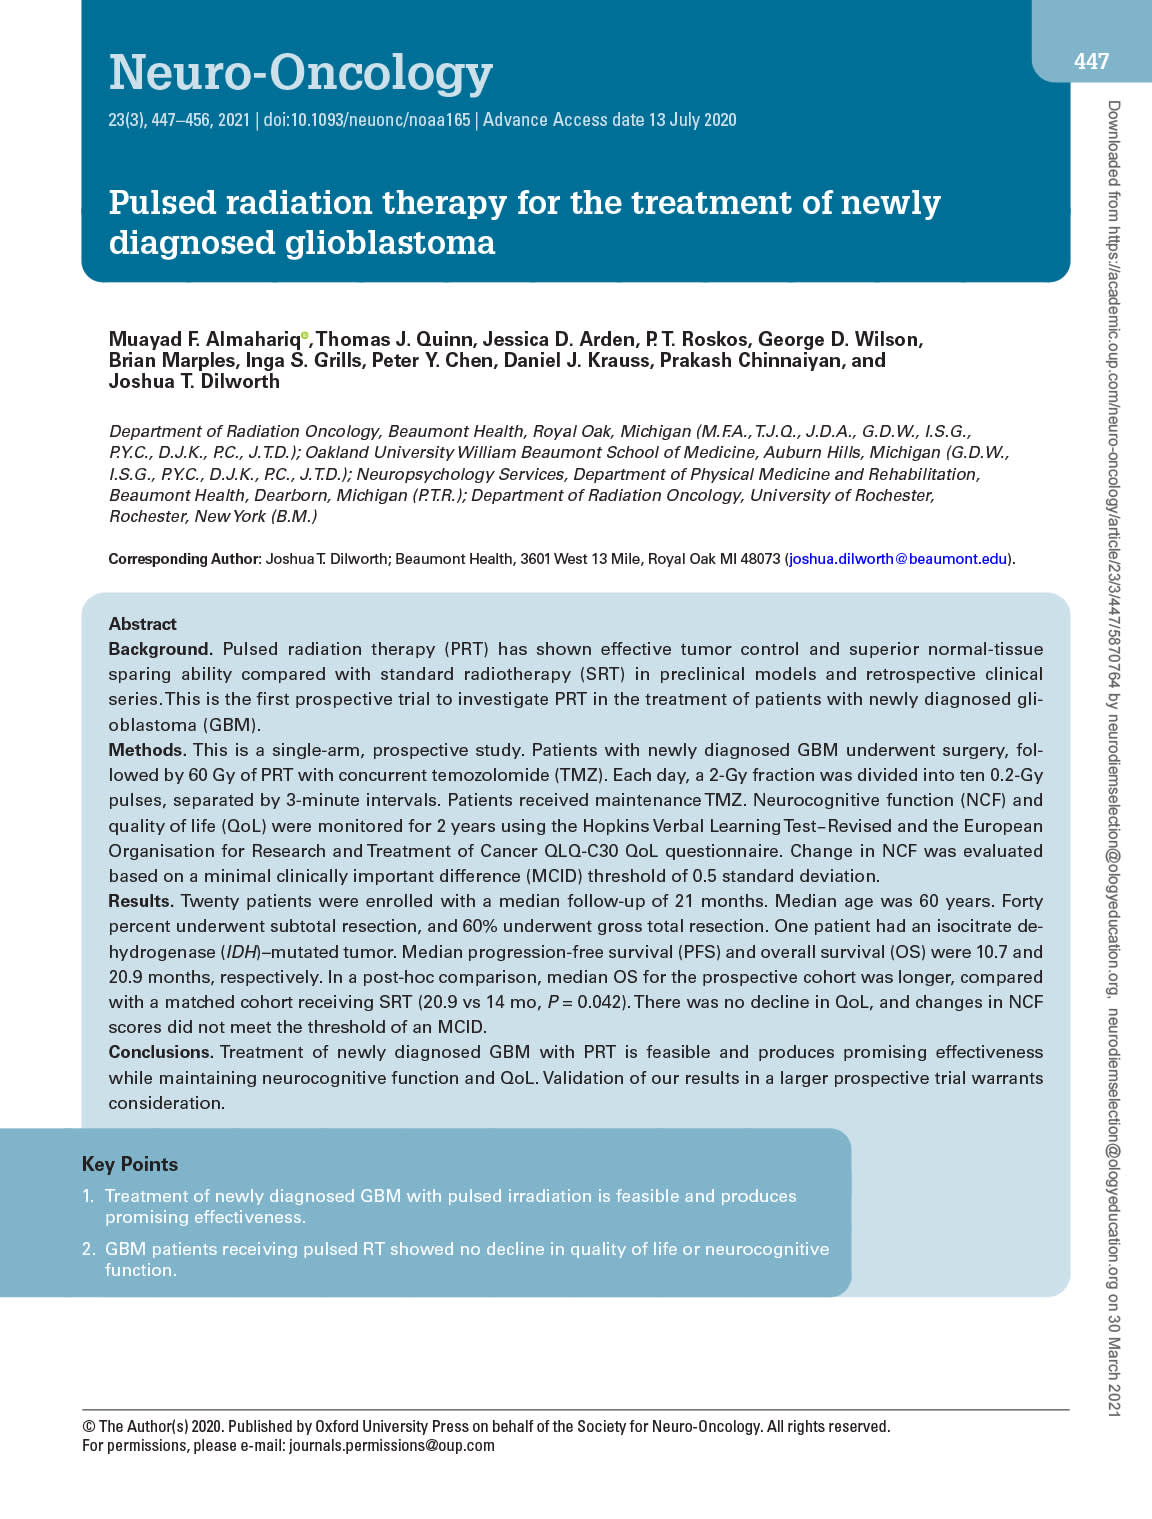 Treatment Of Newly Diagnosed Glioblastoma With Pulsed Rt Feasible With Promising Effectiveness And Maintains Neurocognitive Function And Qol Neurodiem